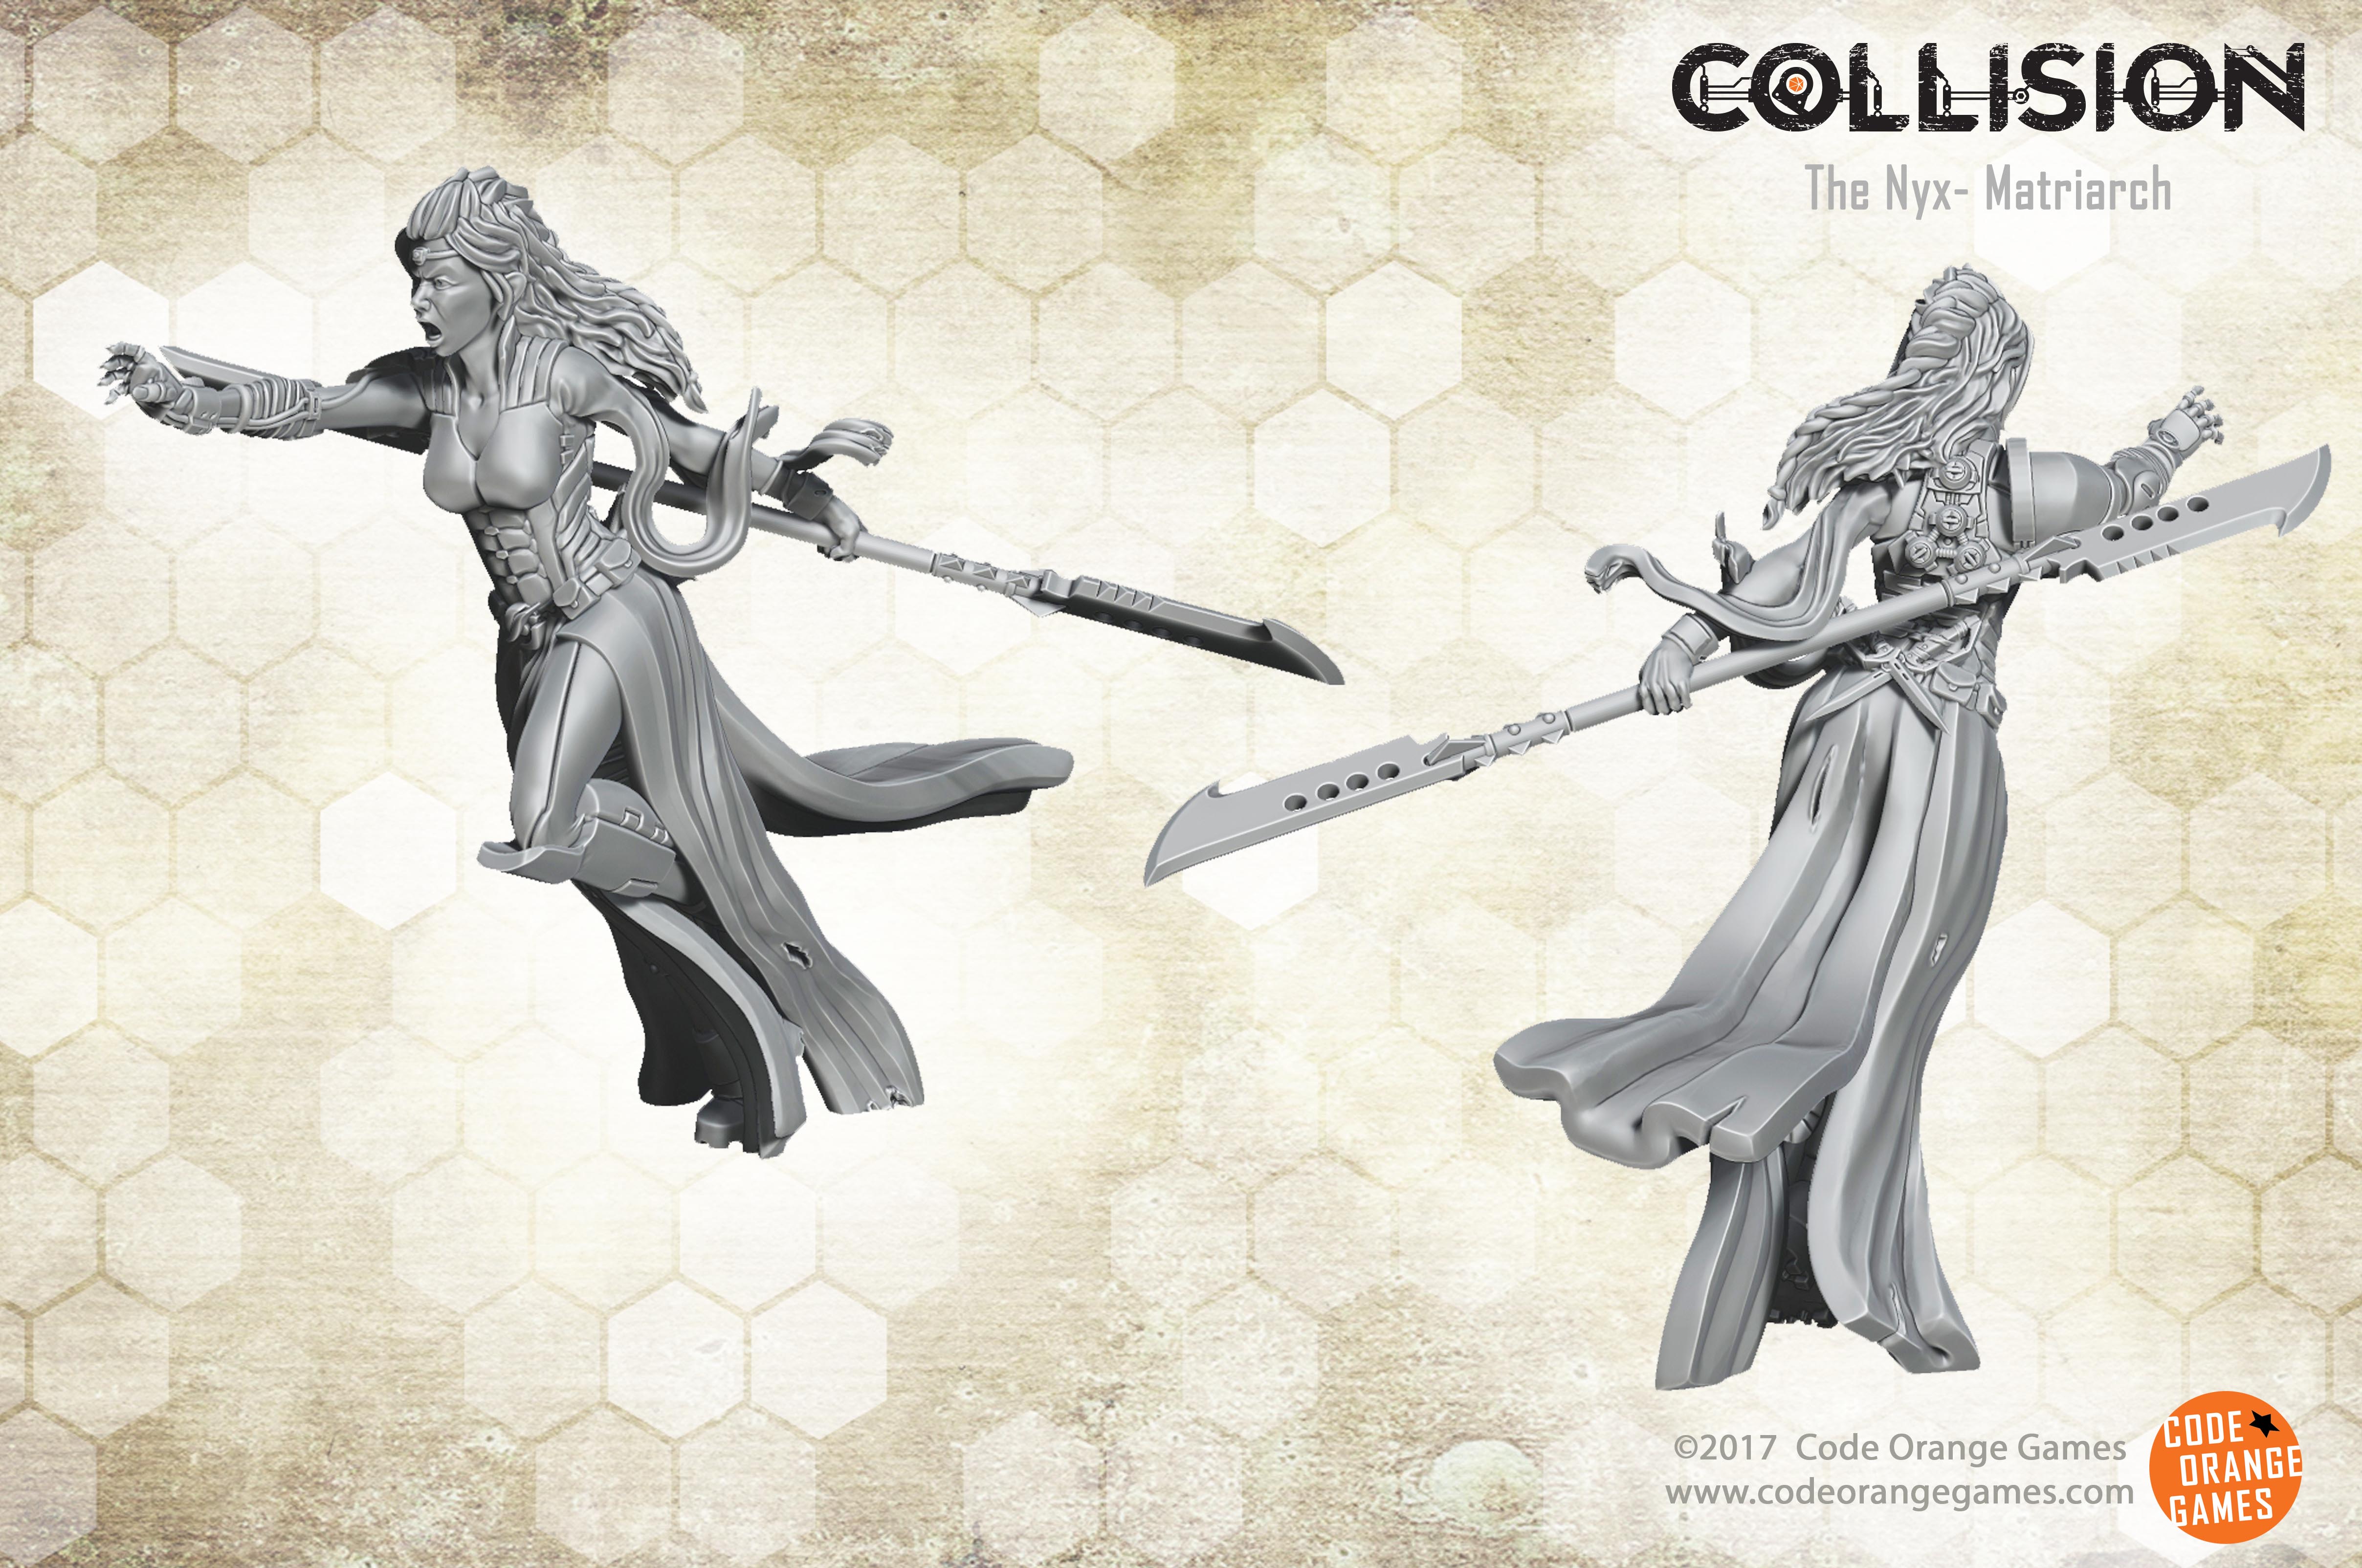 The Matriarch is the leader of the Nyx. She wil lead here warriors into the waste lands of Collision.